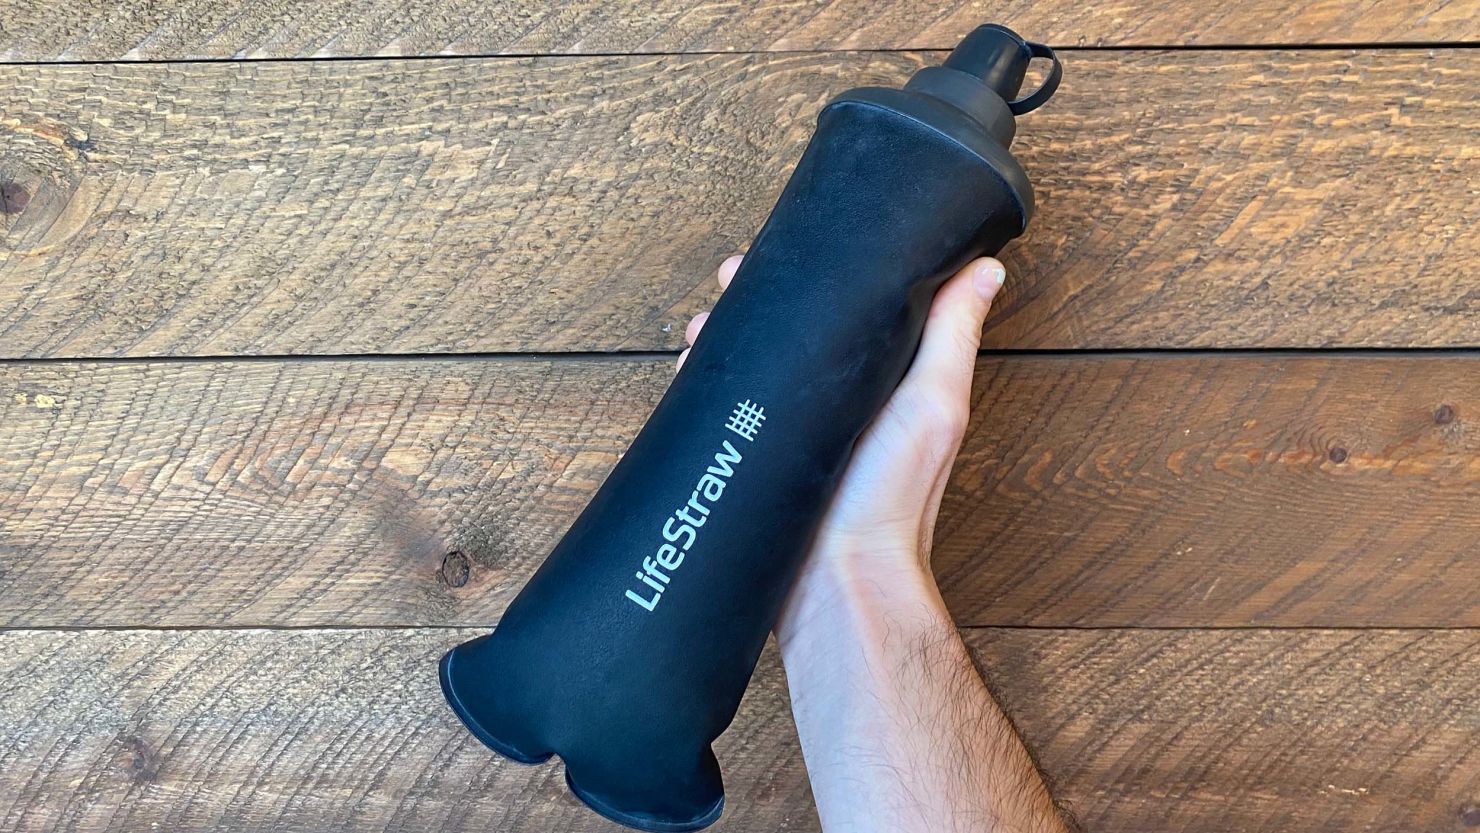 Tried & tested: The best water bottle for your life